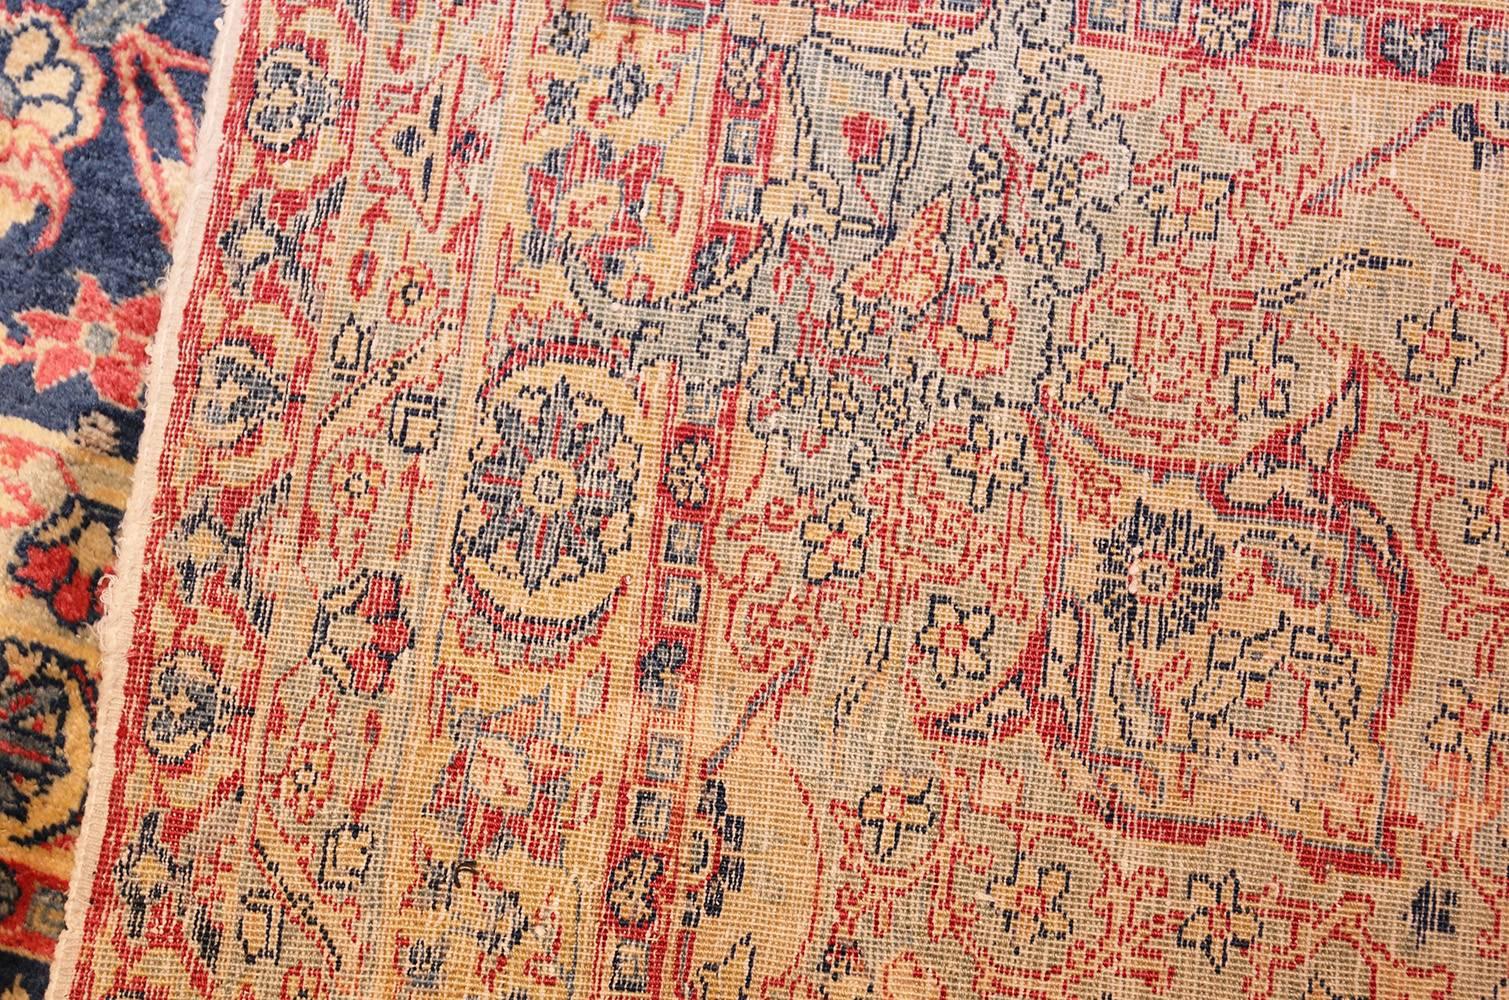 Antique Tabriz carpet, country of origin: Persia, circa 1900. Size: 14 ft 10 in x 21 ft 5 in (4.52 m x 6.53 m)

Like most Tabriz carpets, this piece is a testament to the artist's mastery of the craft. Viewers of this antique rug are treated to a